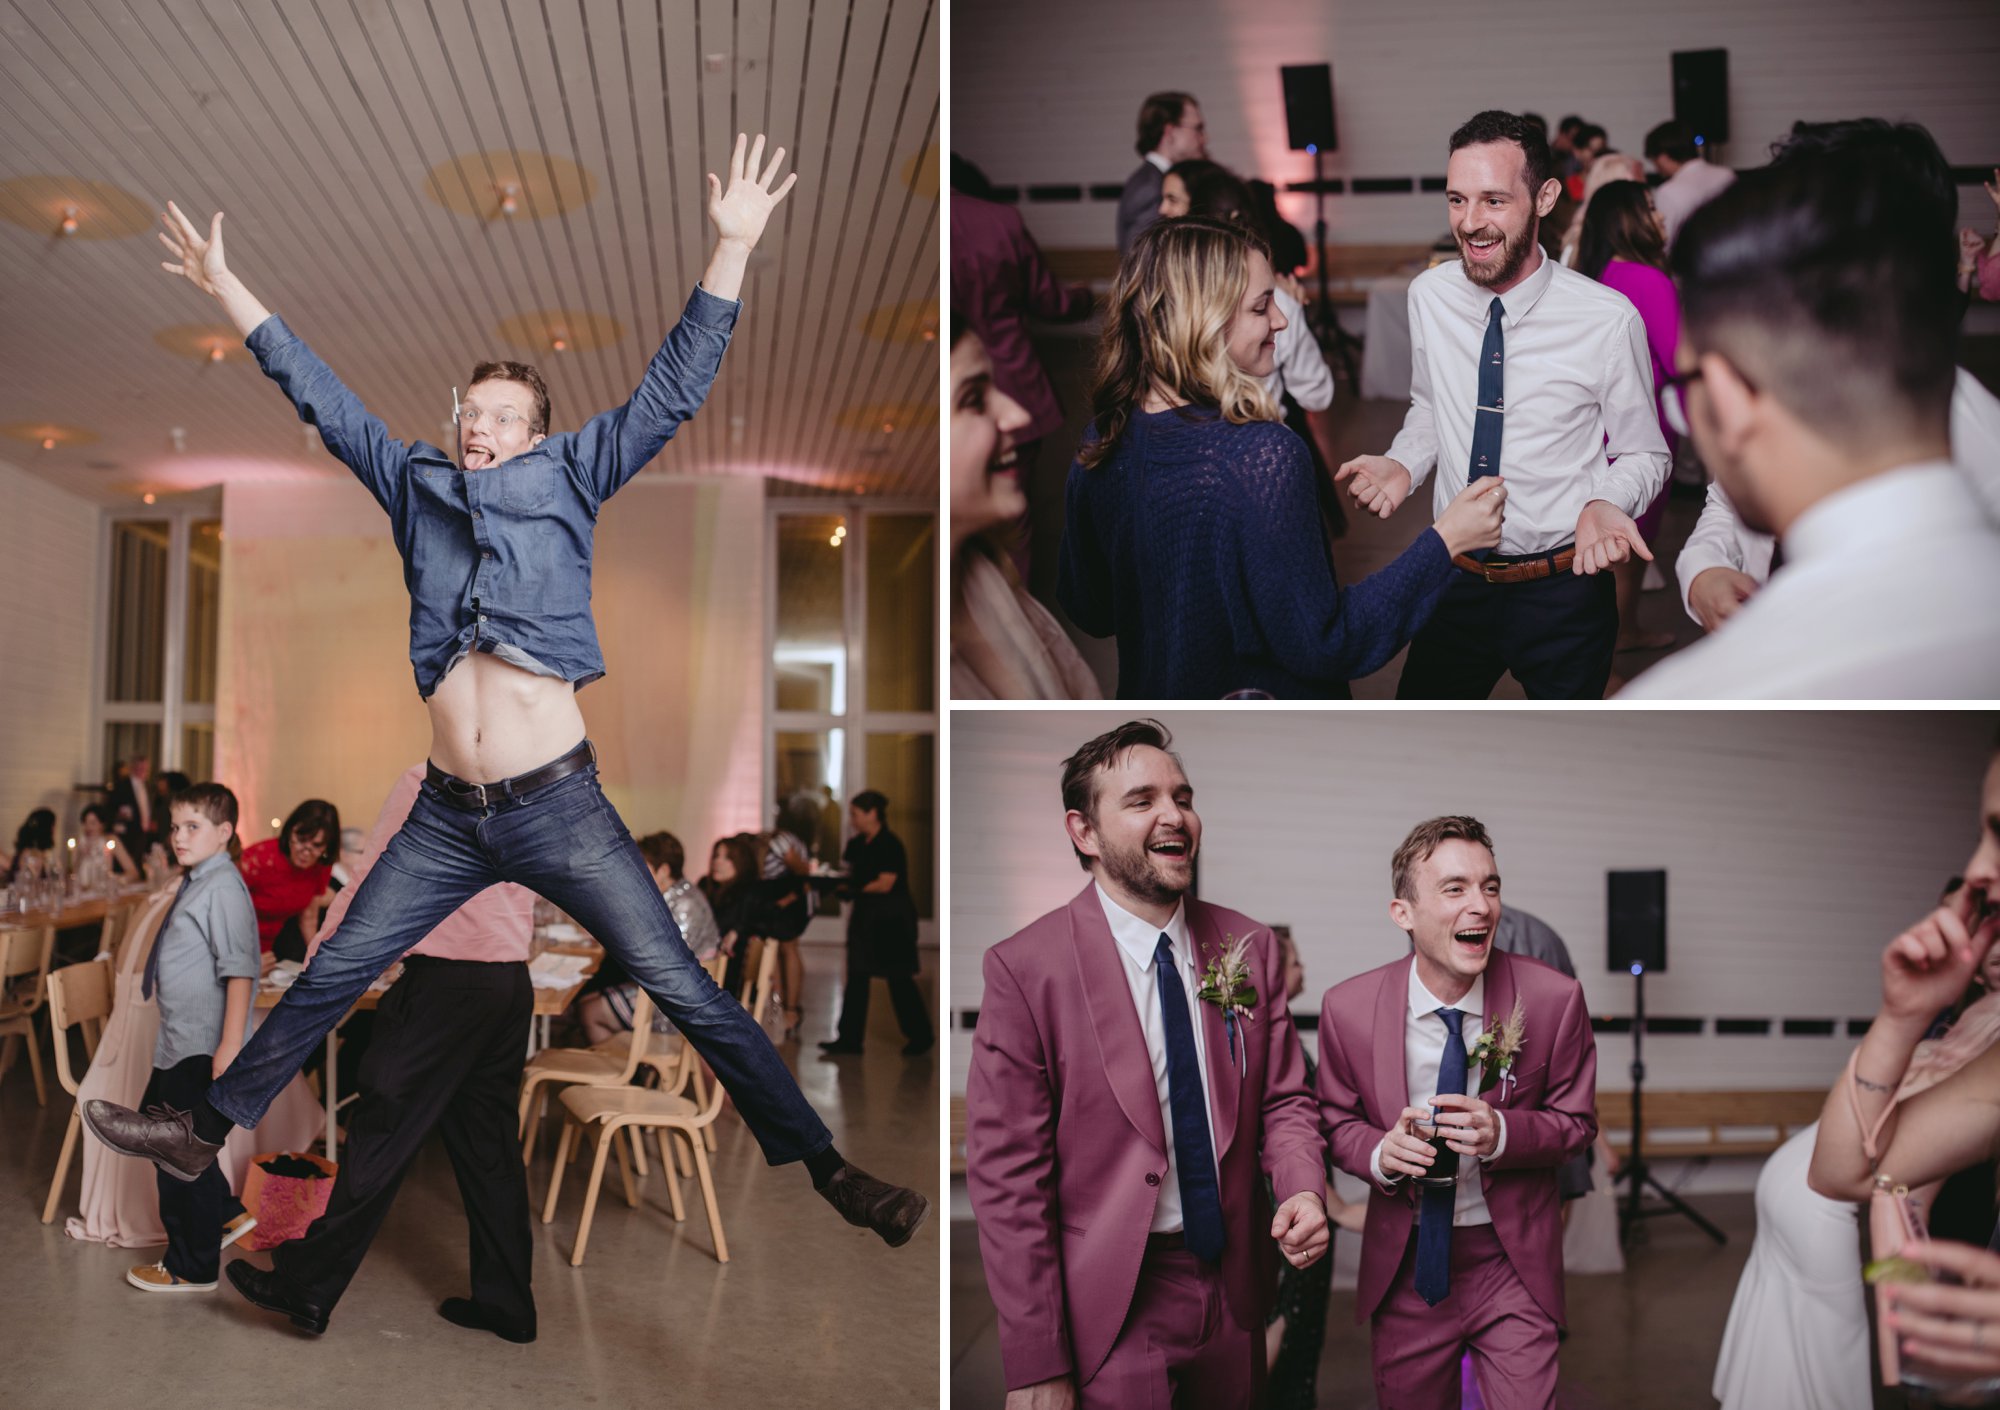 Bride with pink hair and groom in a purple suit prospect house wedding in austin tx with pastel decor and wild florals party dancing reception